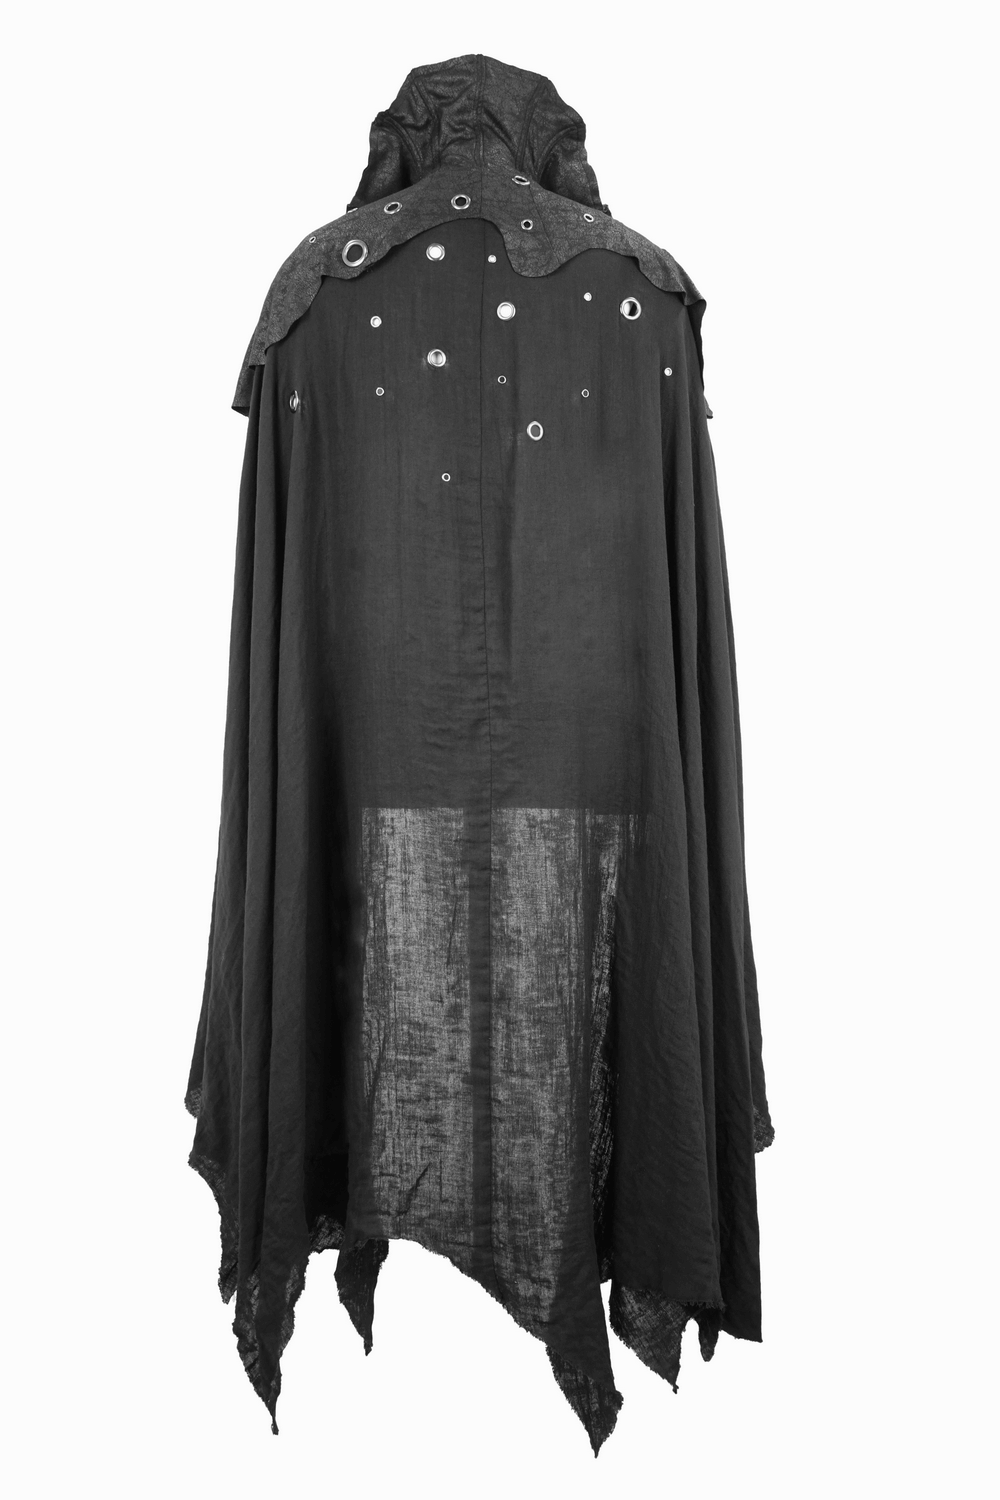 Gothic Long Cloak with Stand-Up Collar For Men